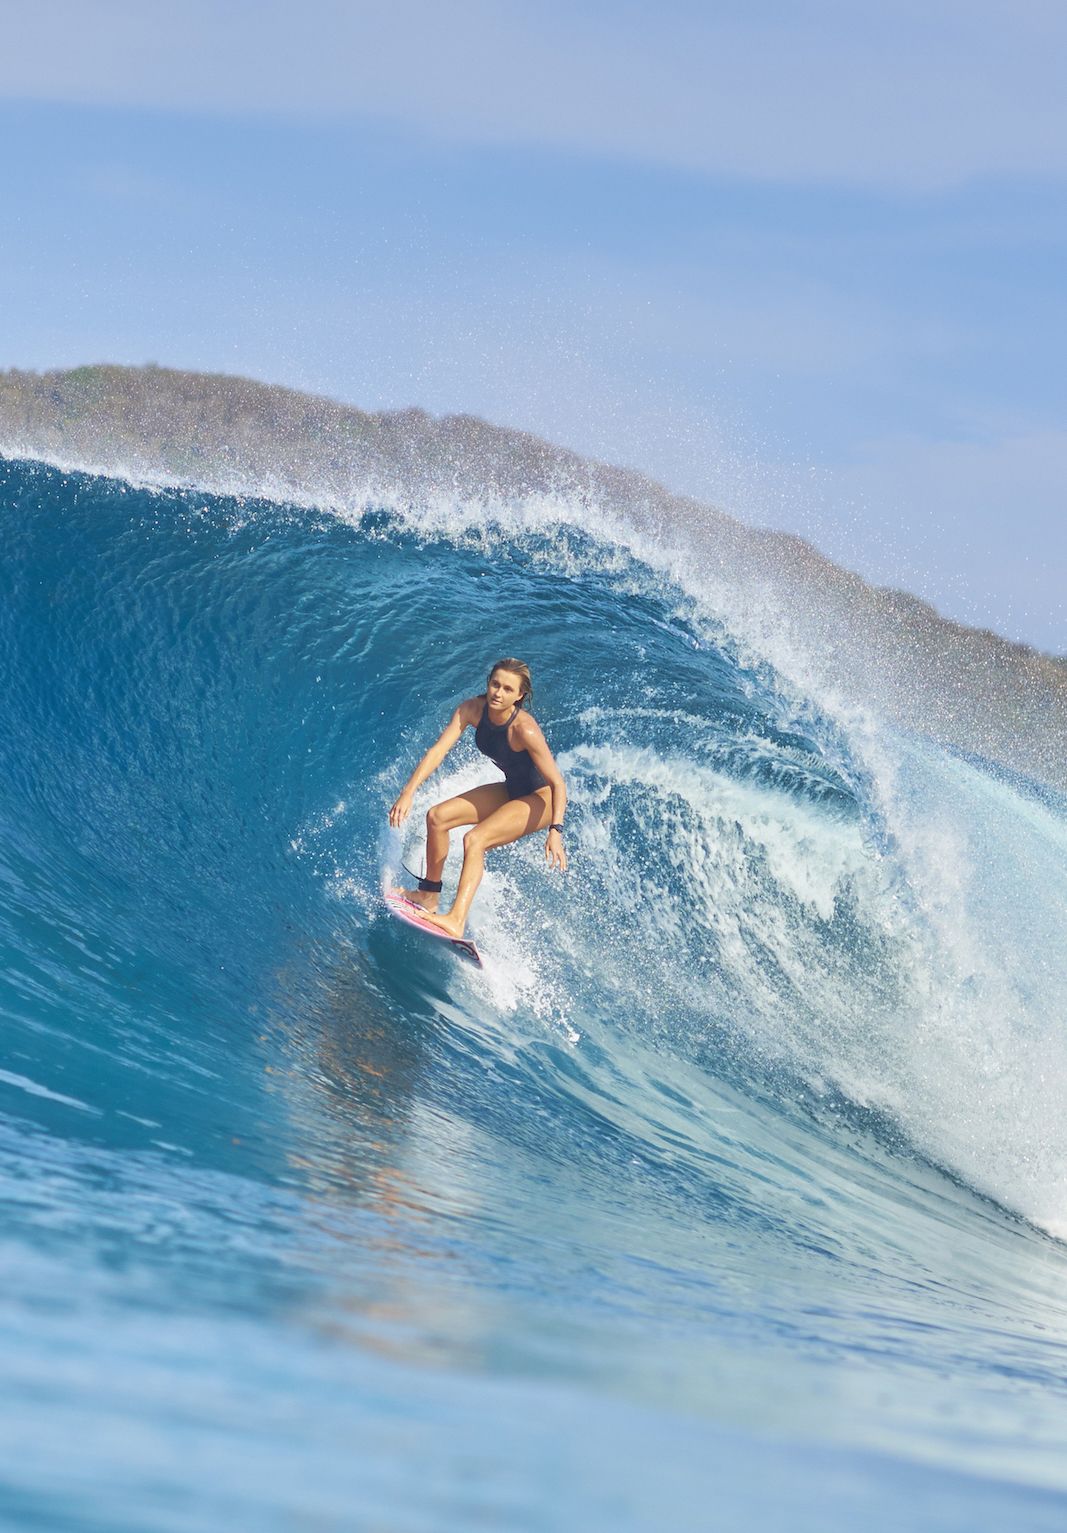 Alana blanchard â new directions surfing waves surfing photography surfing pictures